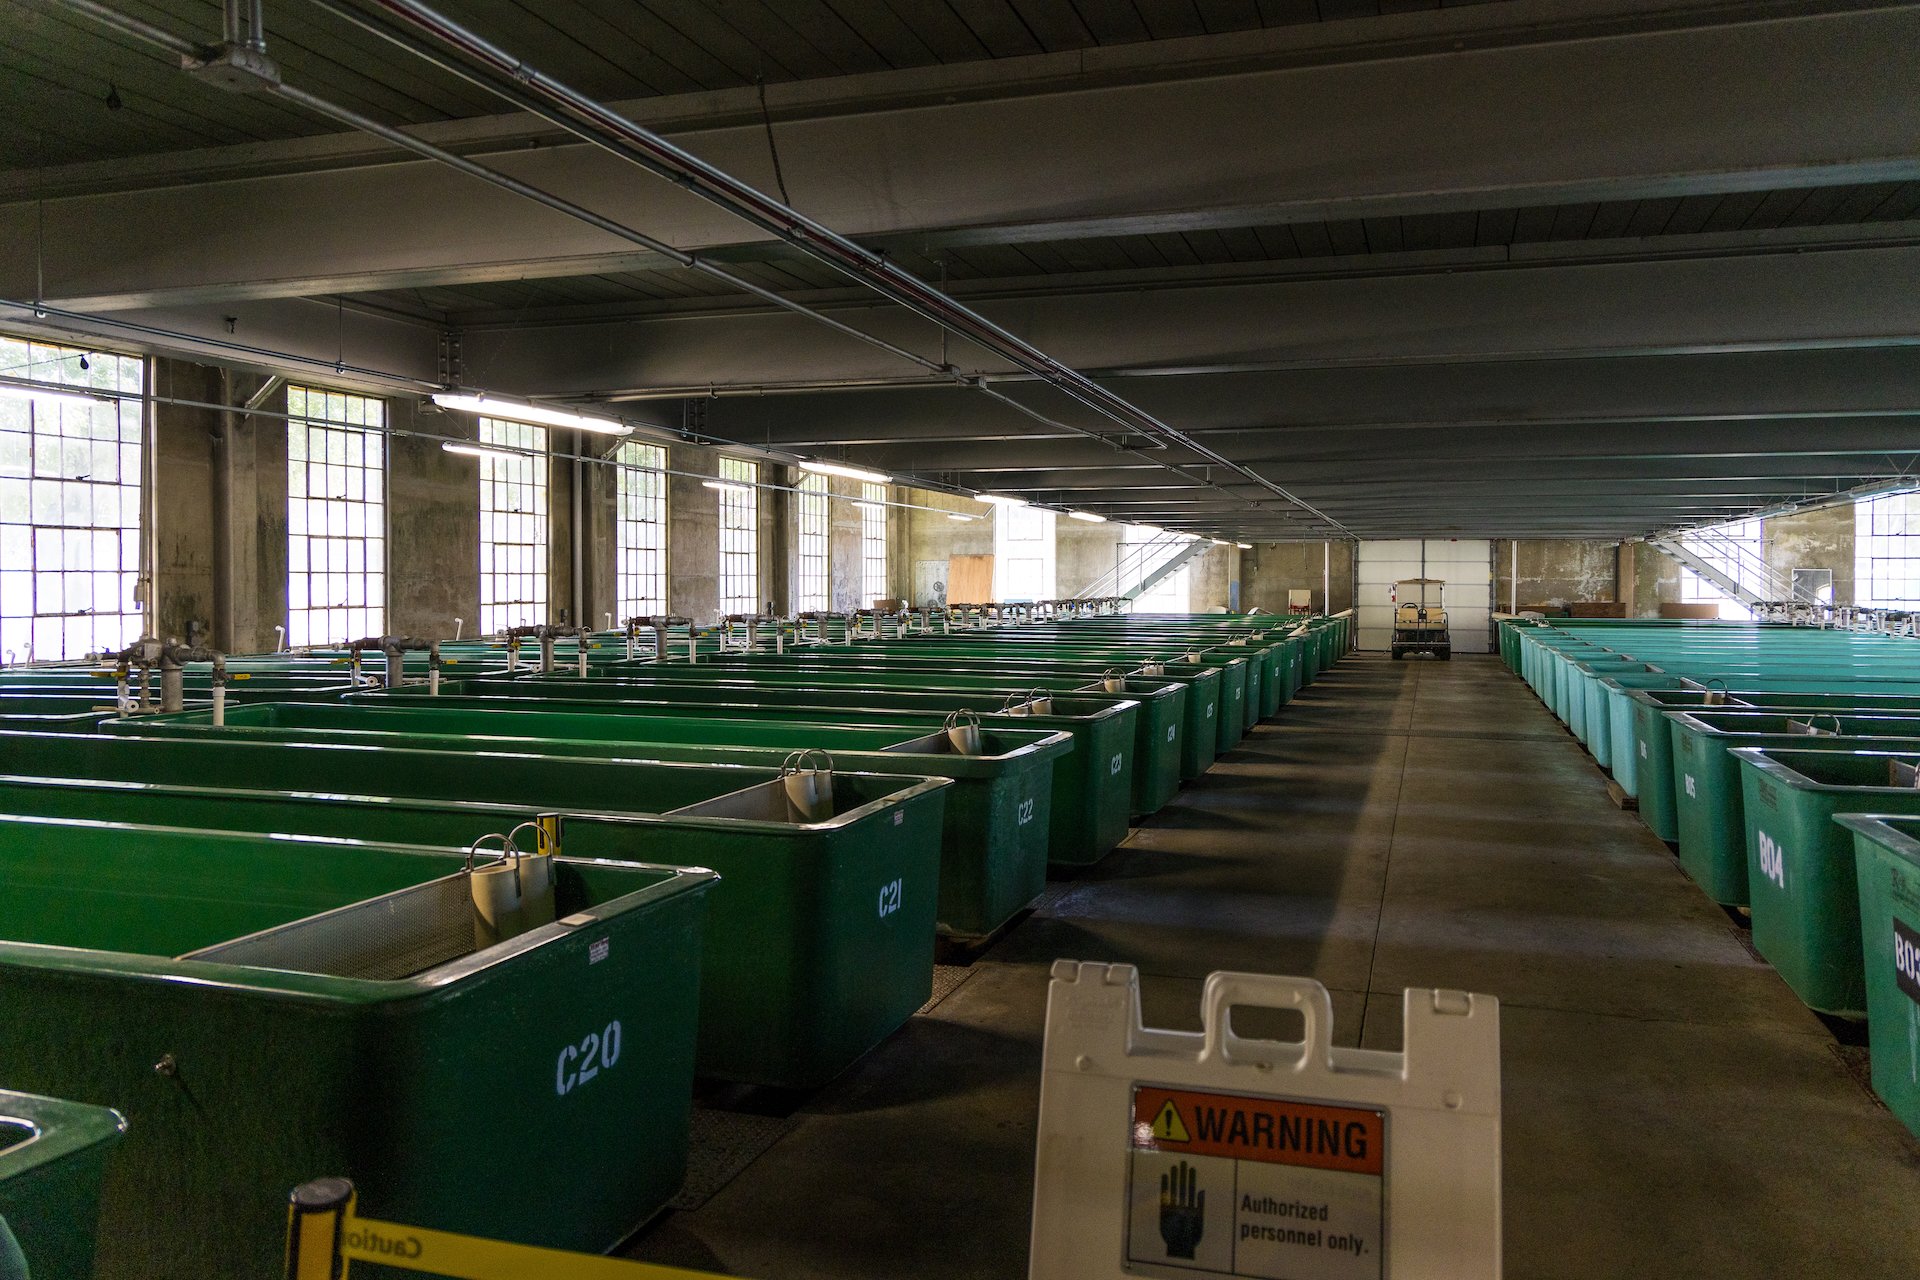  Inside the building, all of the eggs are raised into fingerlings in these green tubs. 1.2M every year. 